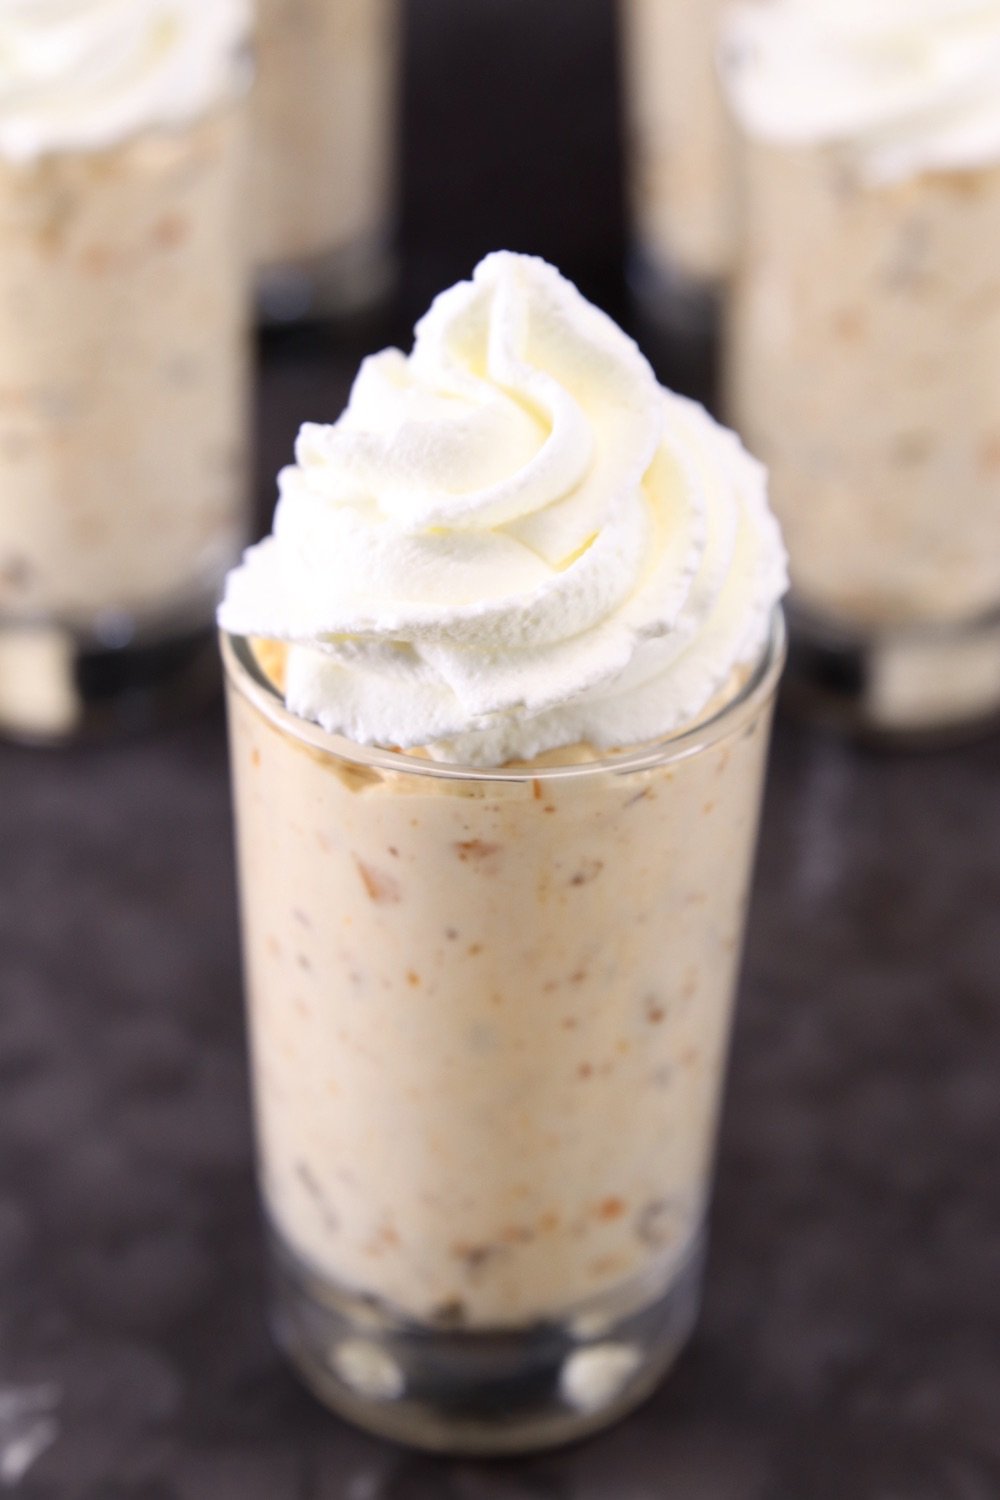 Butterfinger cheesecake in a juice glass topped with whipped cream